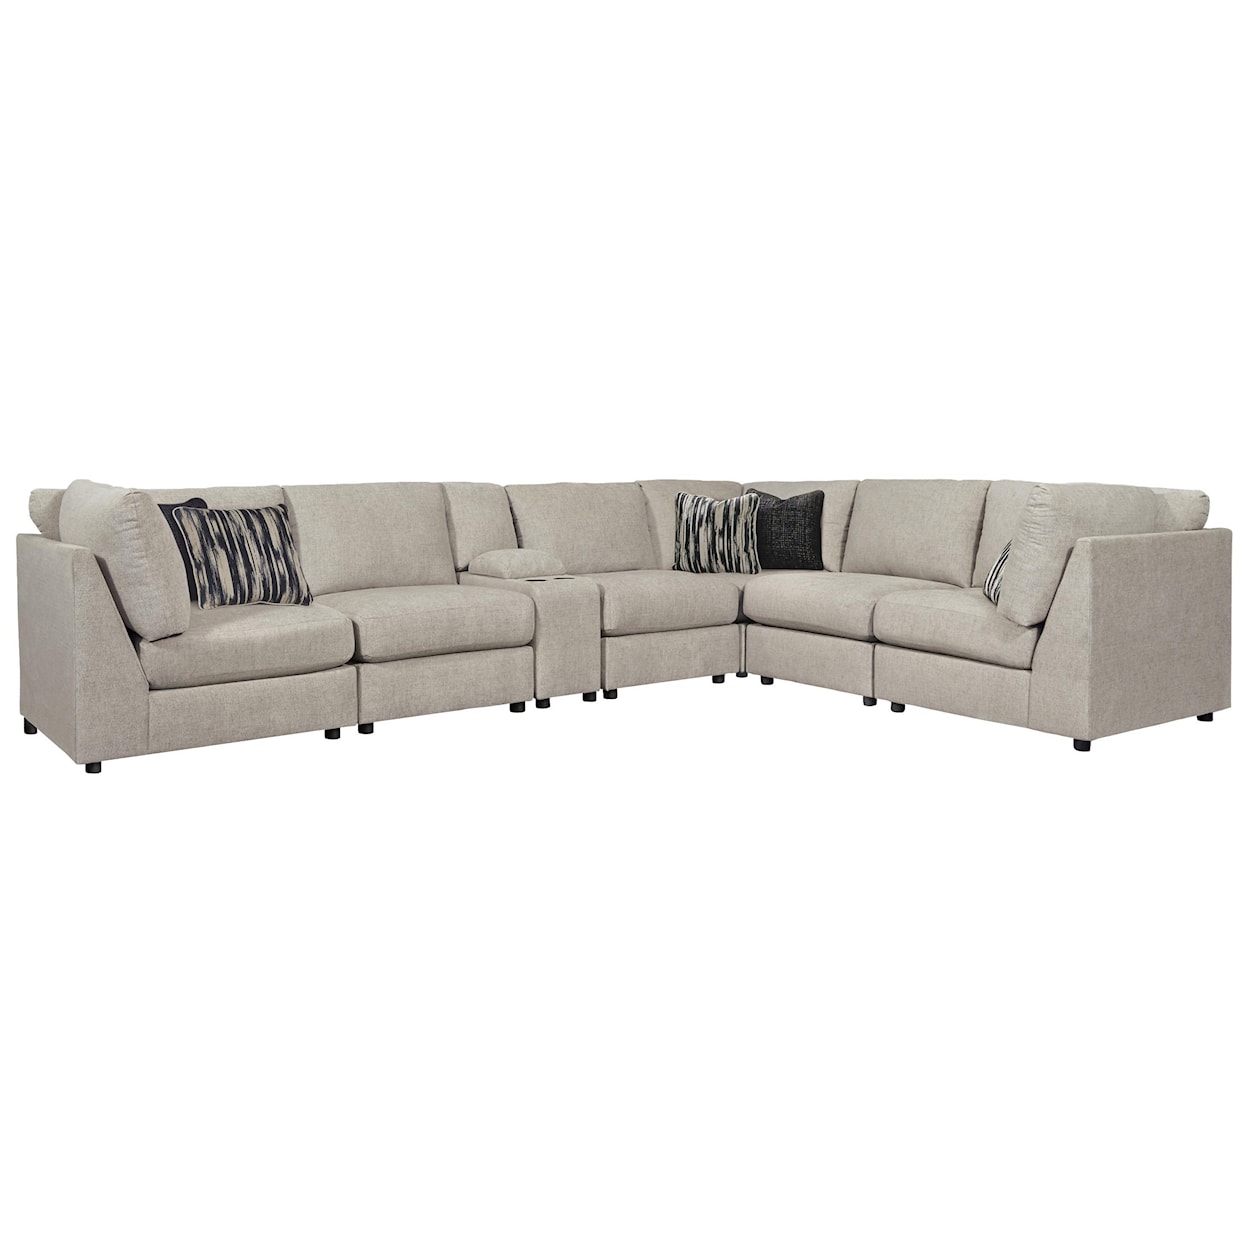 Benchcraft 45003 Sectional